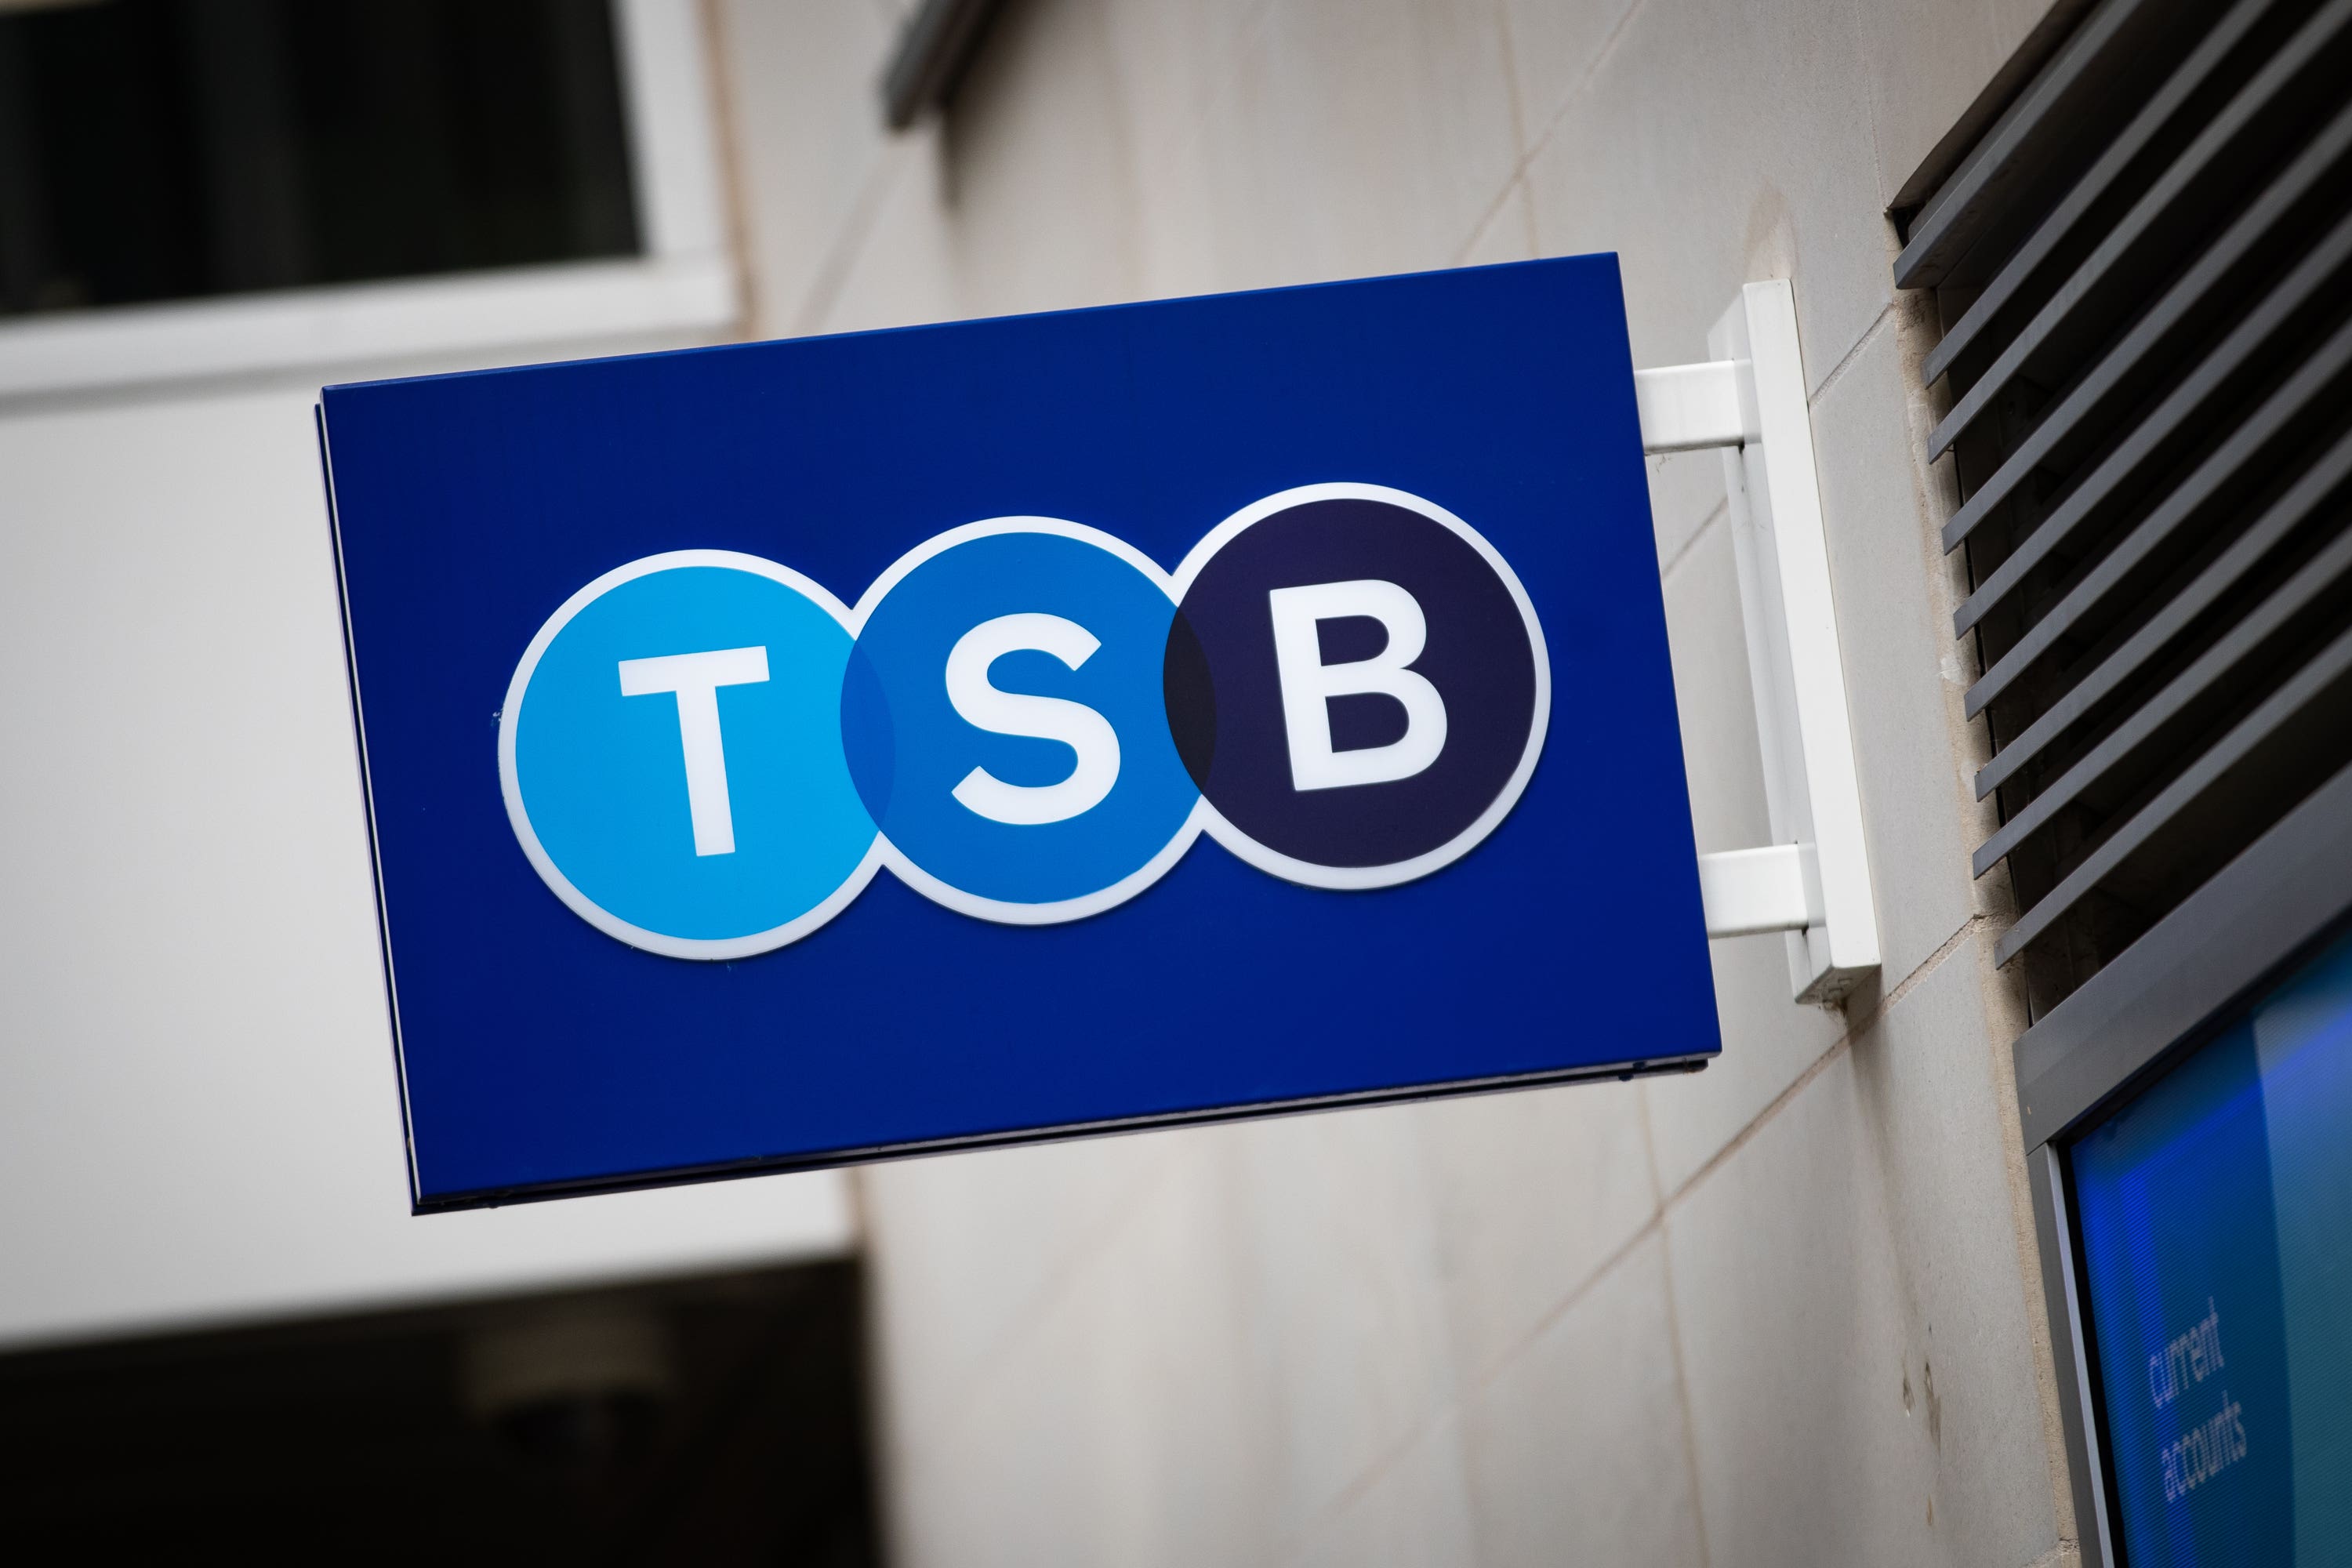 TSB Bank has been fined £48.7 million by City regulators for a botched IT upgrade in 2018